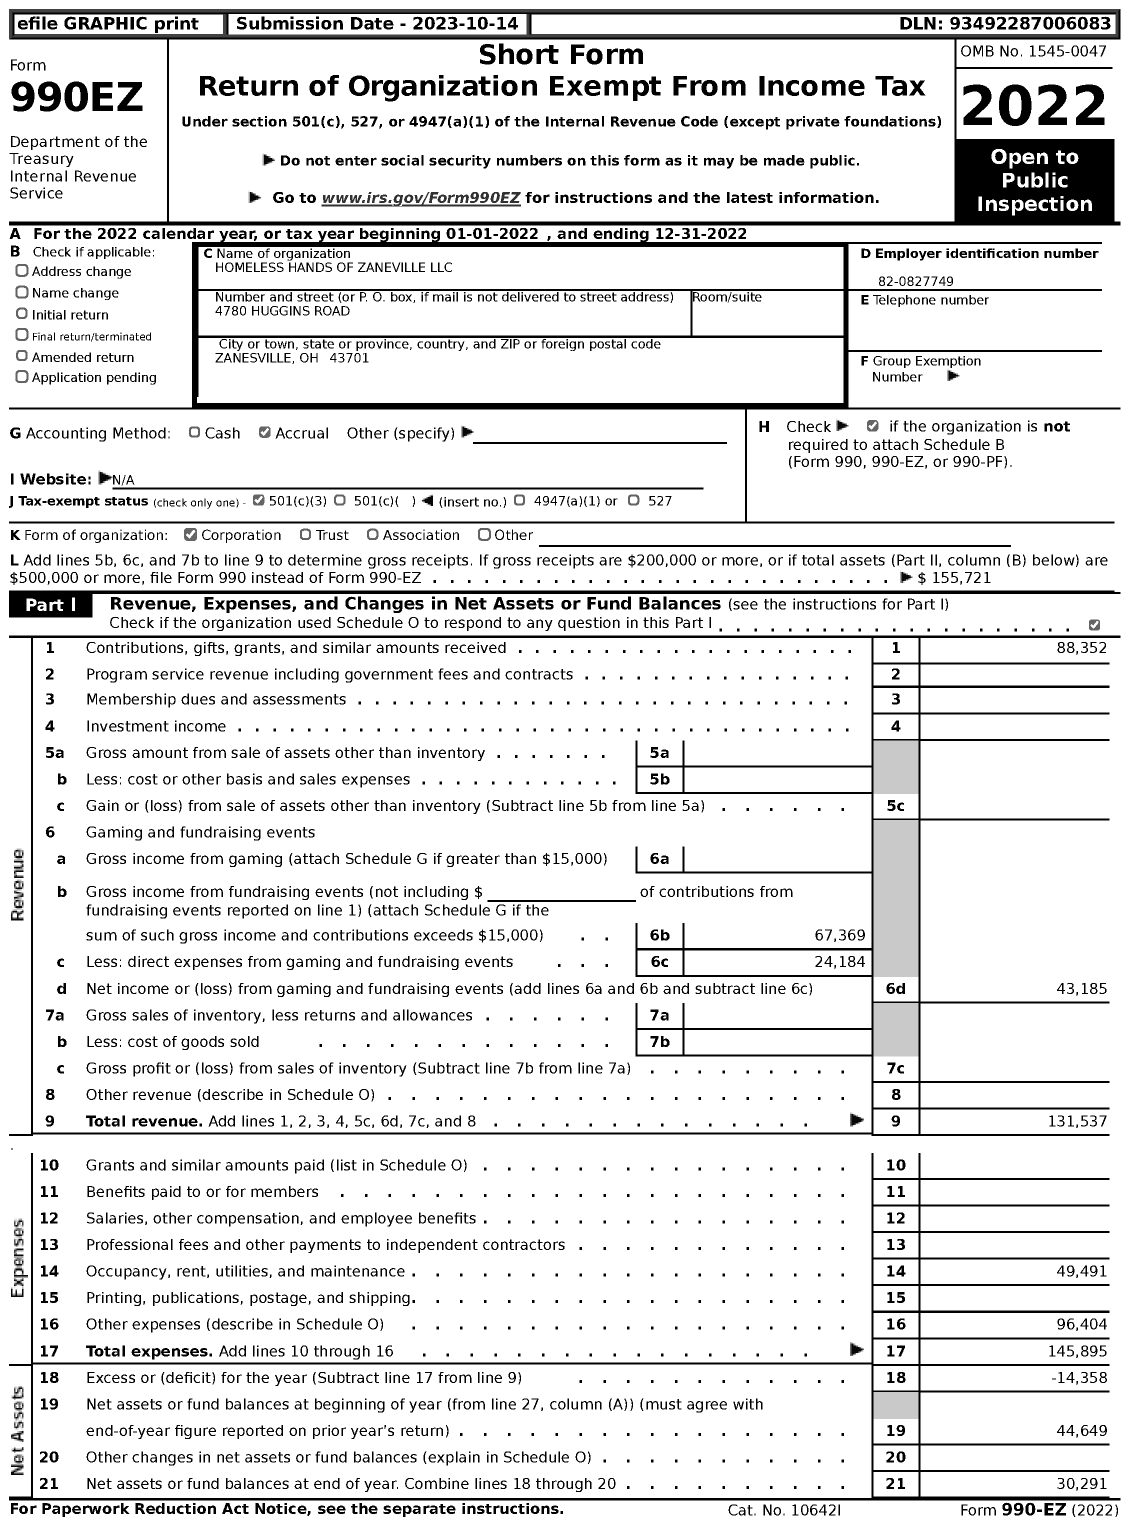 Image of first page of 2022 Form 990EZ for Homeless Hands of Zaneville LLC